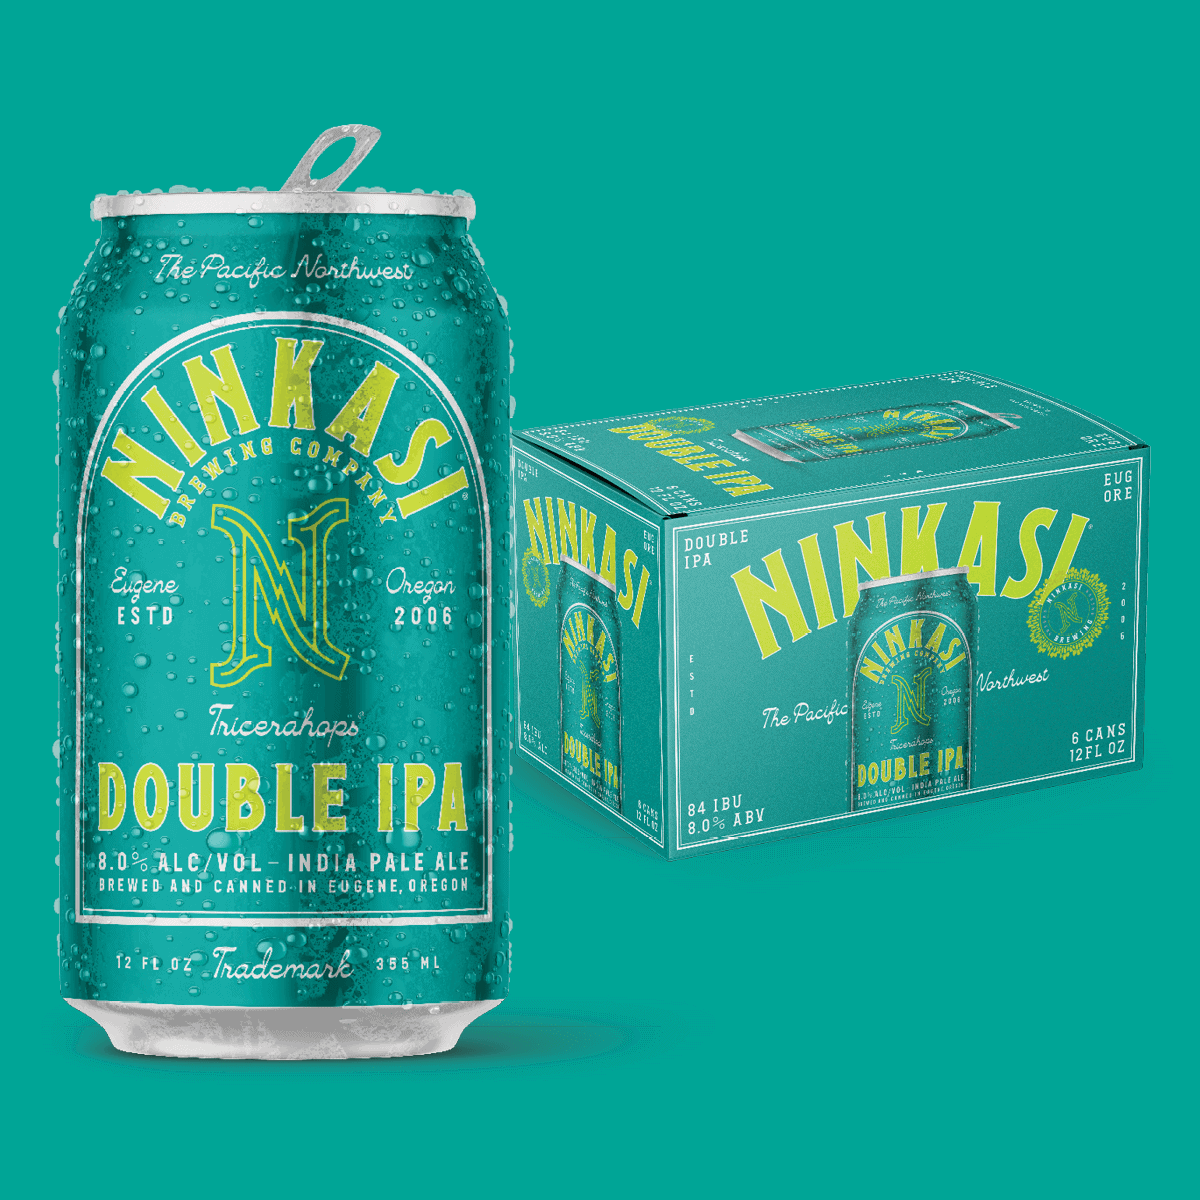 Image of Ninkasi Tricerahops Double IPA can and six pack box. The label features vibrant green can with bright yellow lettering on a green background.